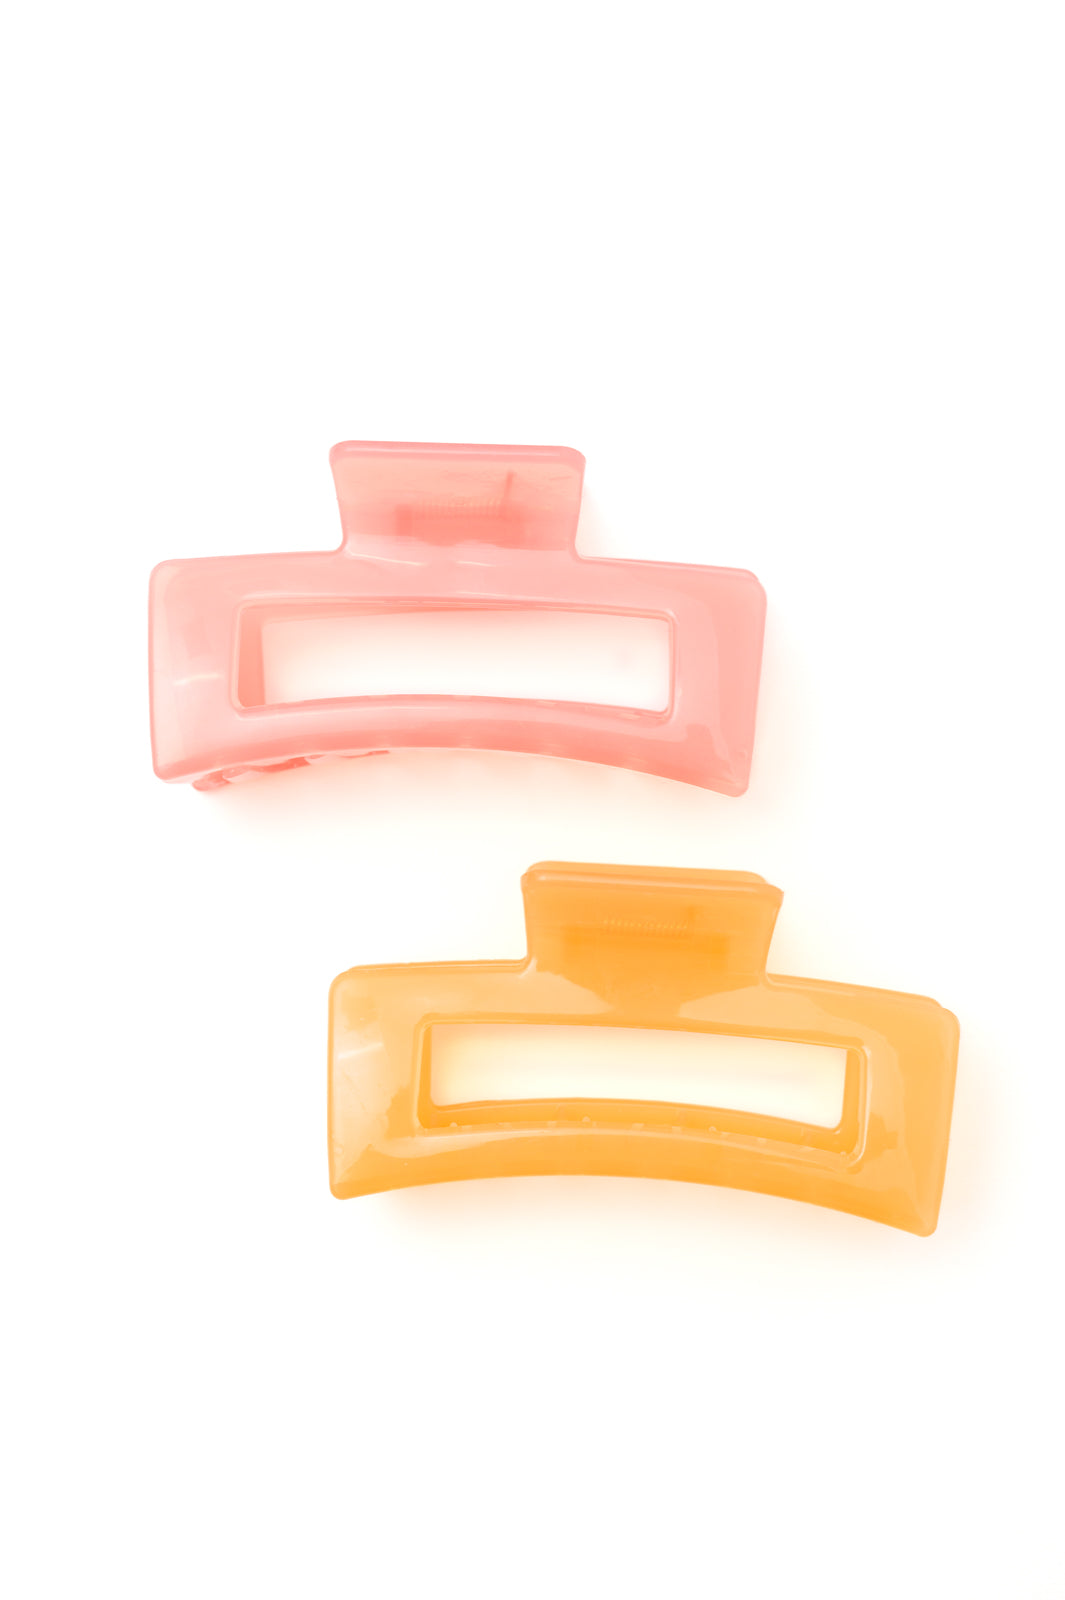 Jelly Rectangle Claw Clip in Watermelon - WEBSITE EXCLUSIVE